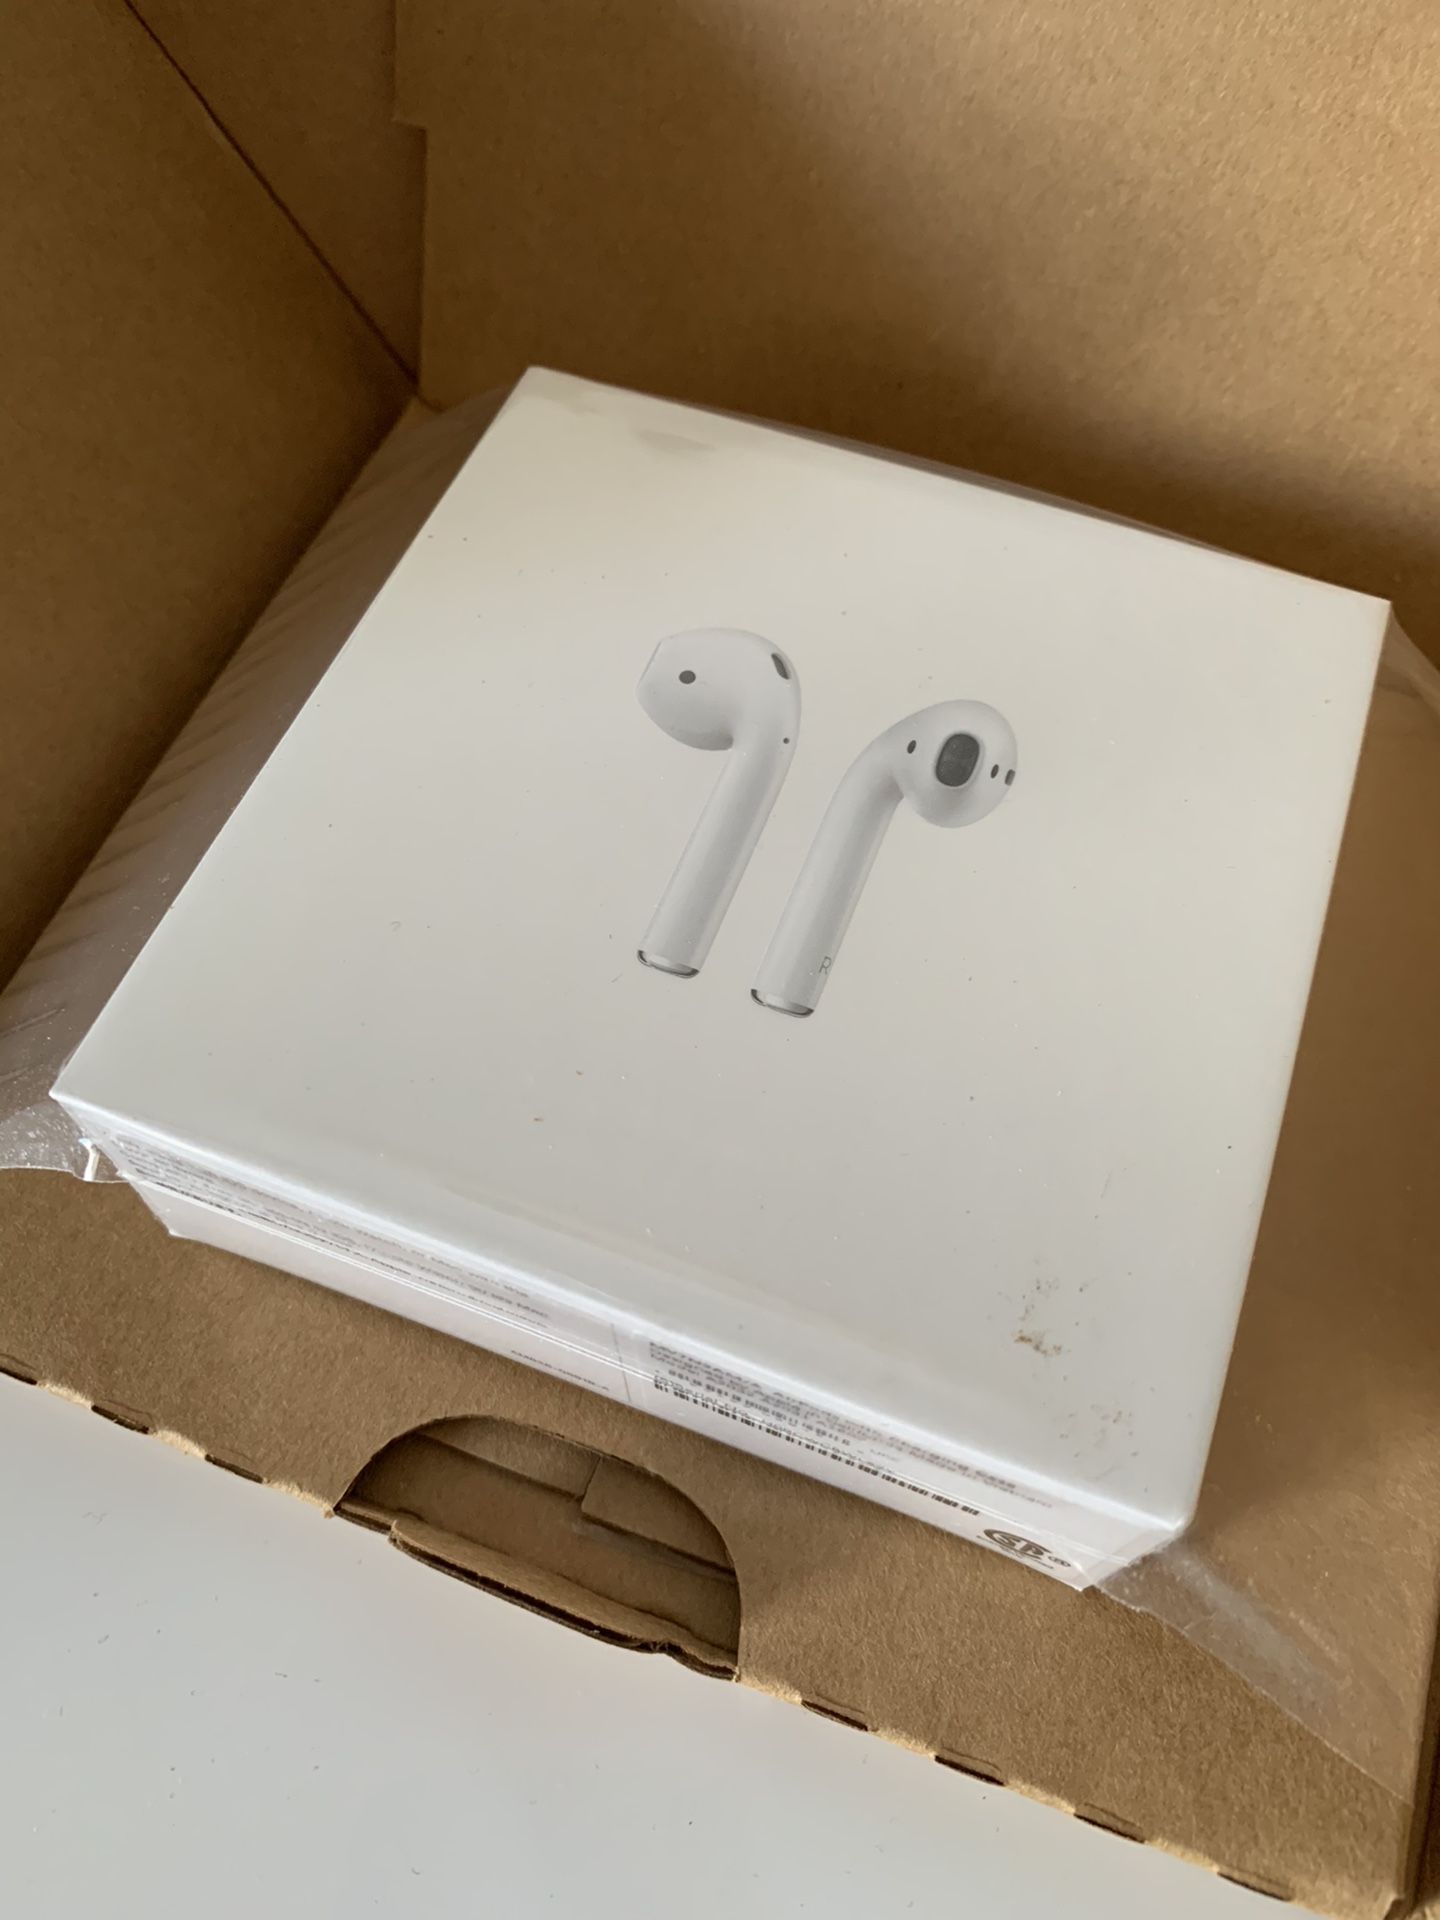 Brand New Apple Airpods with charging case